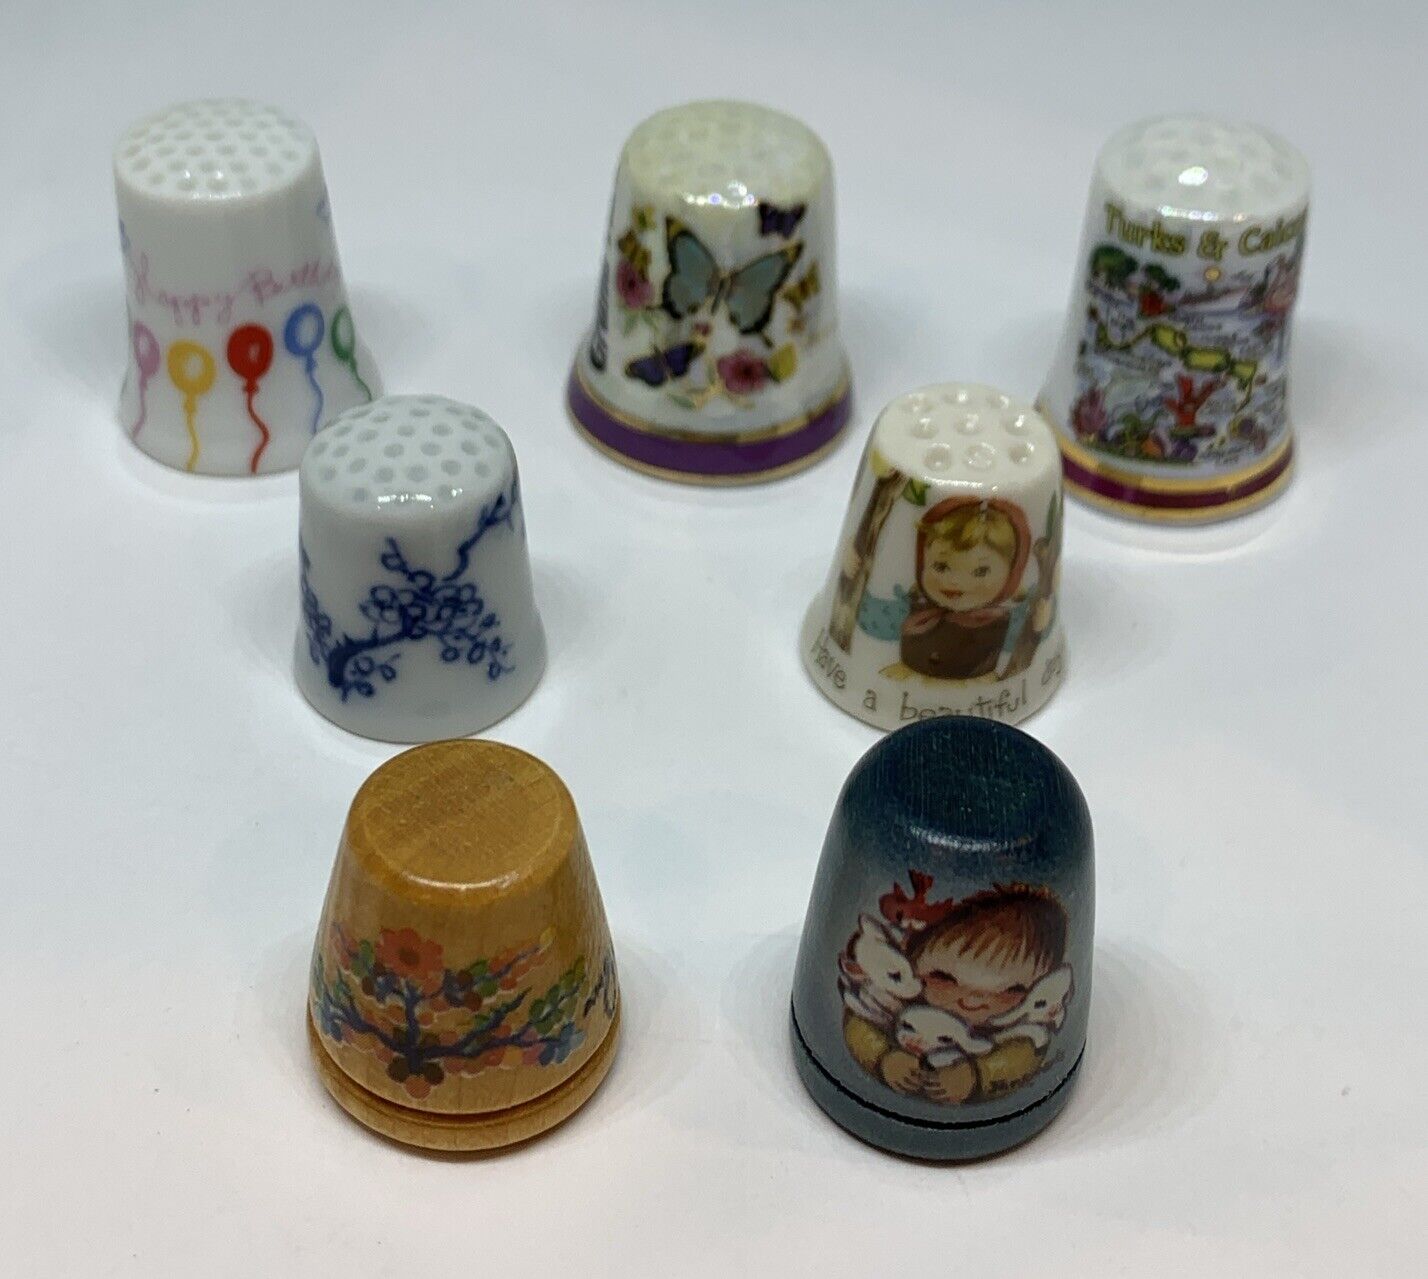 Lot of 7 Vintage Collectible Thimbles Porcelain and Wood Floral & Nature Themed